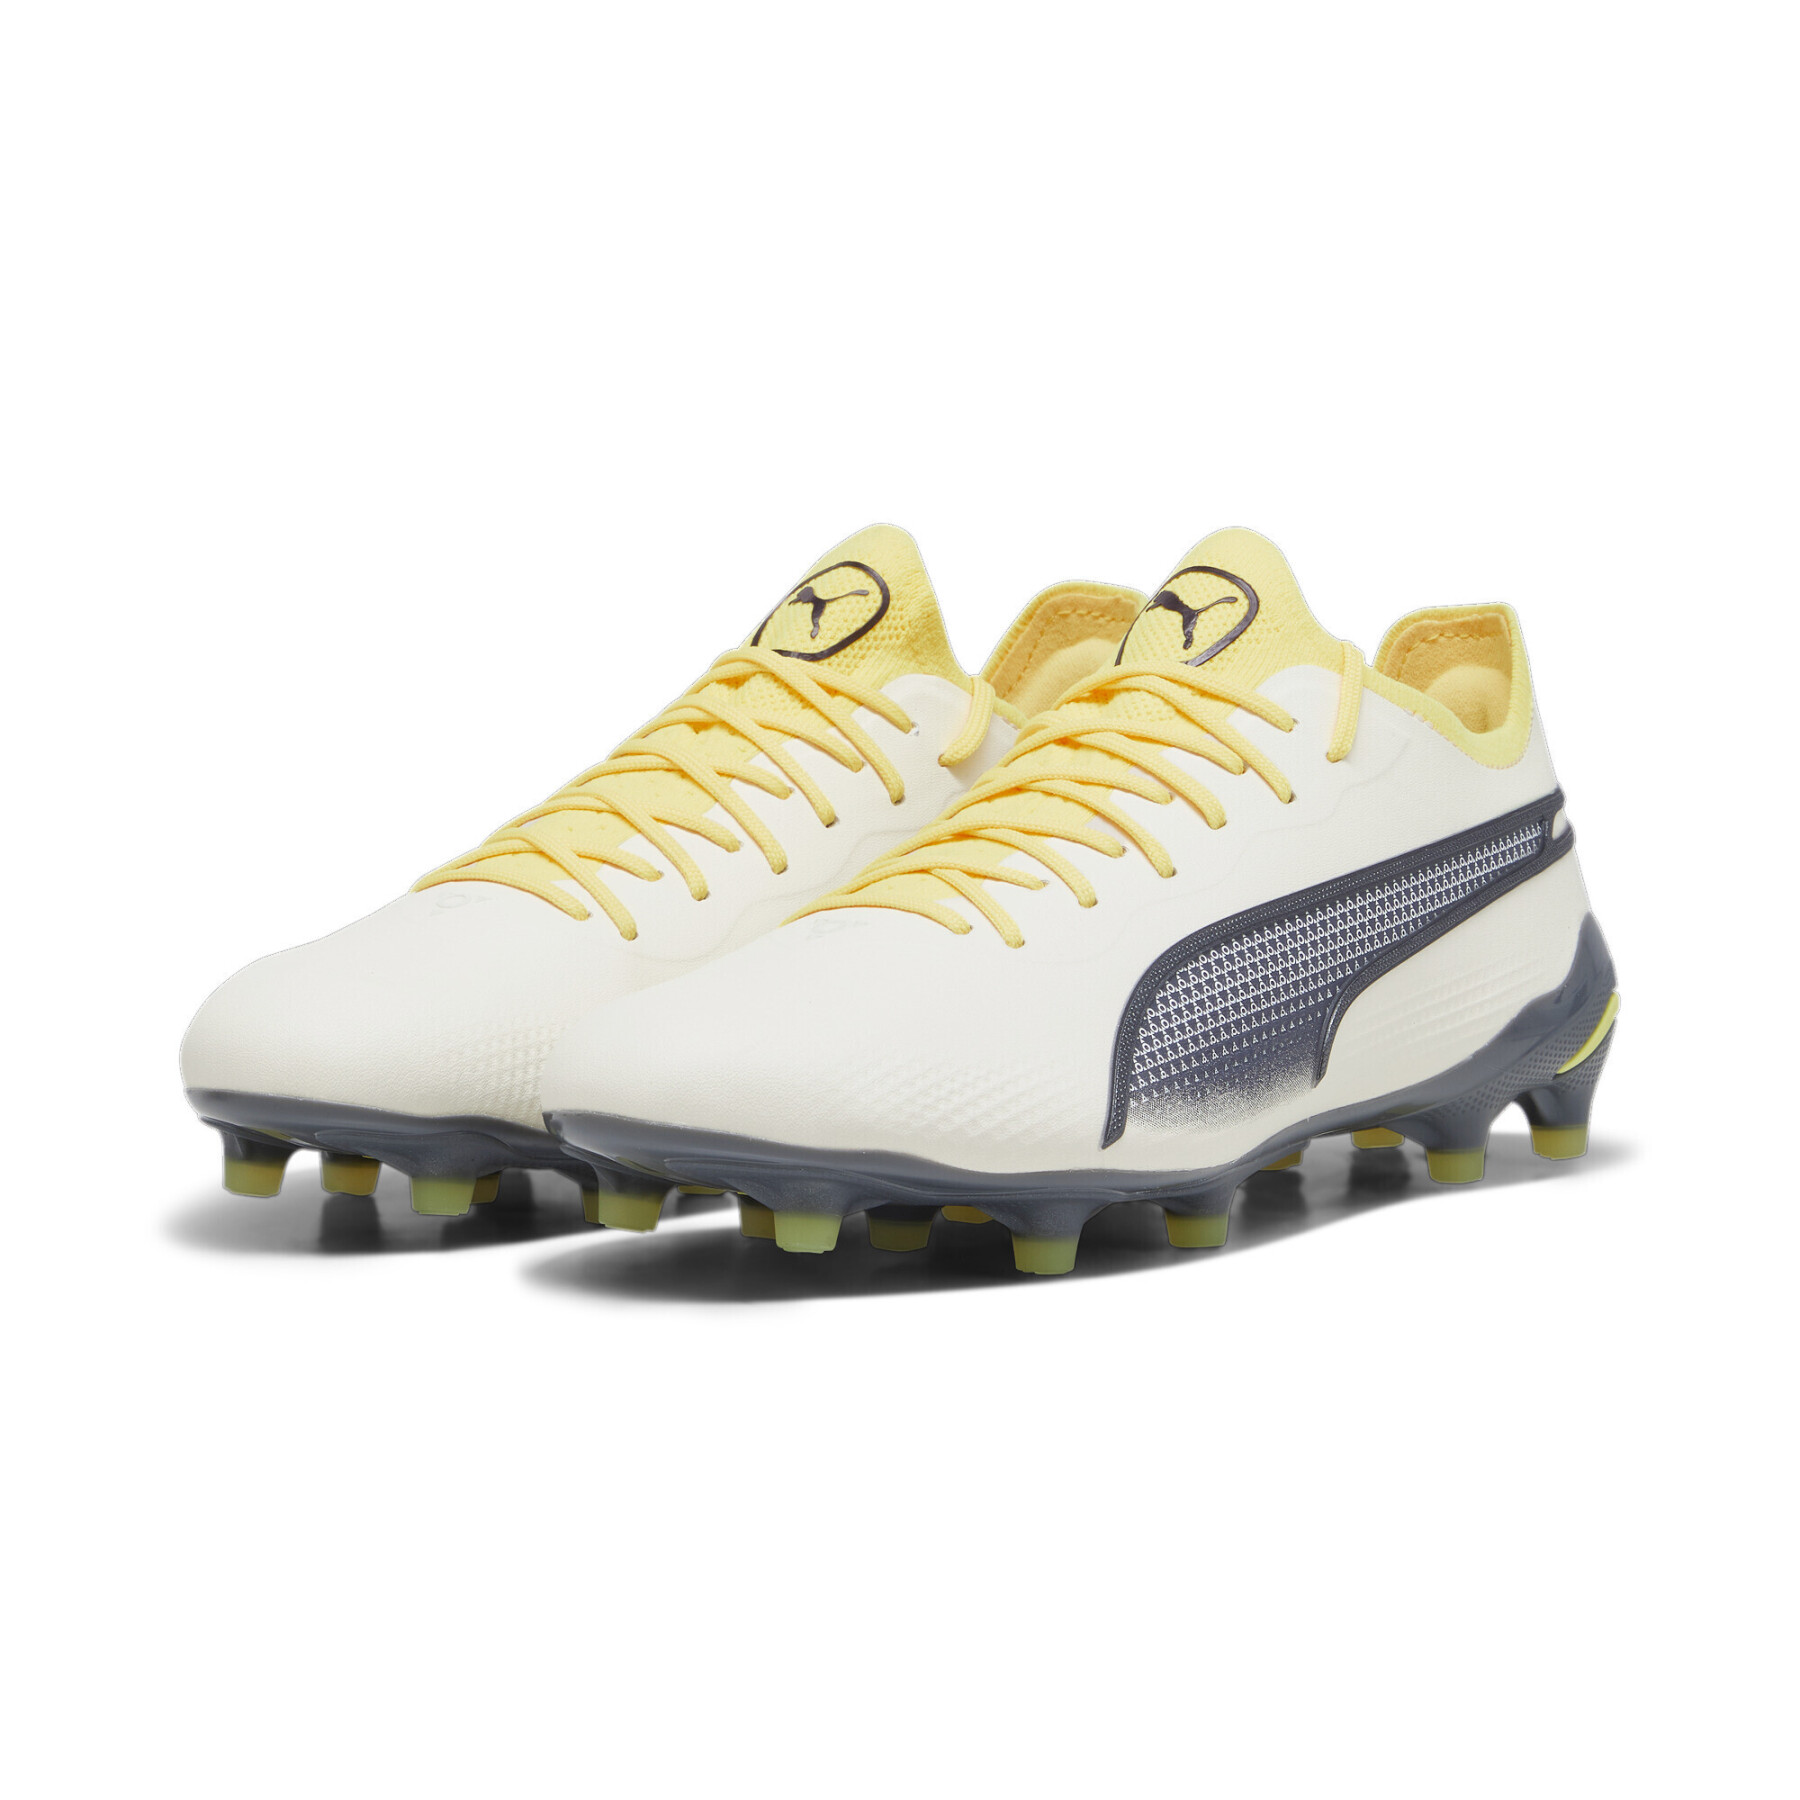 Chaussures de football Puma King Ultimate FG/AG - Voltage Pack